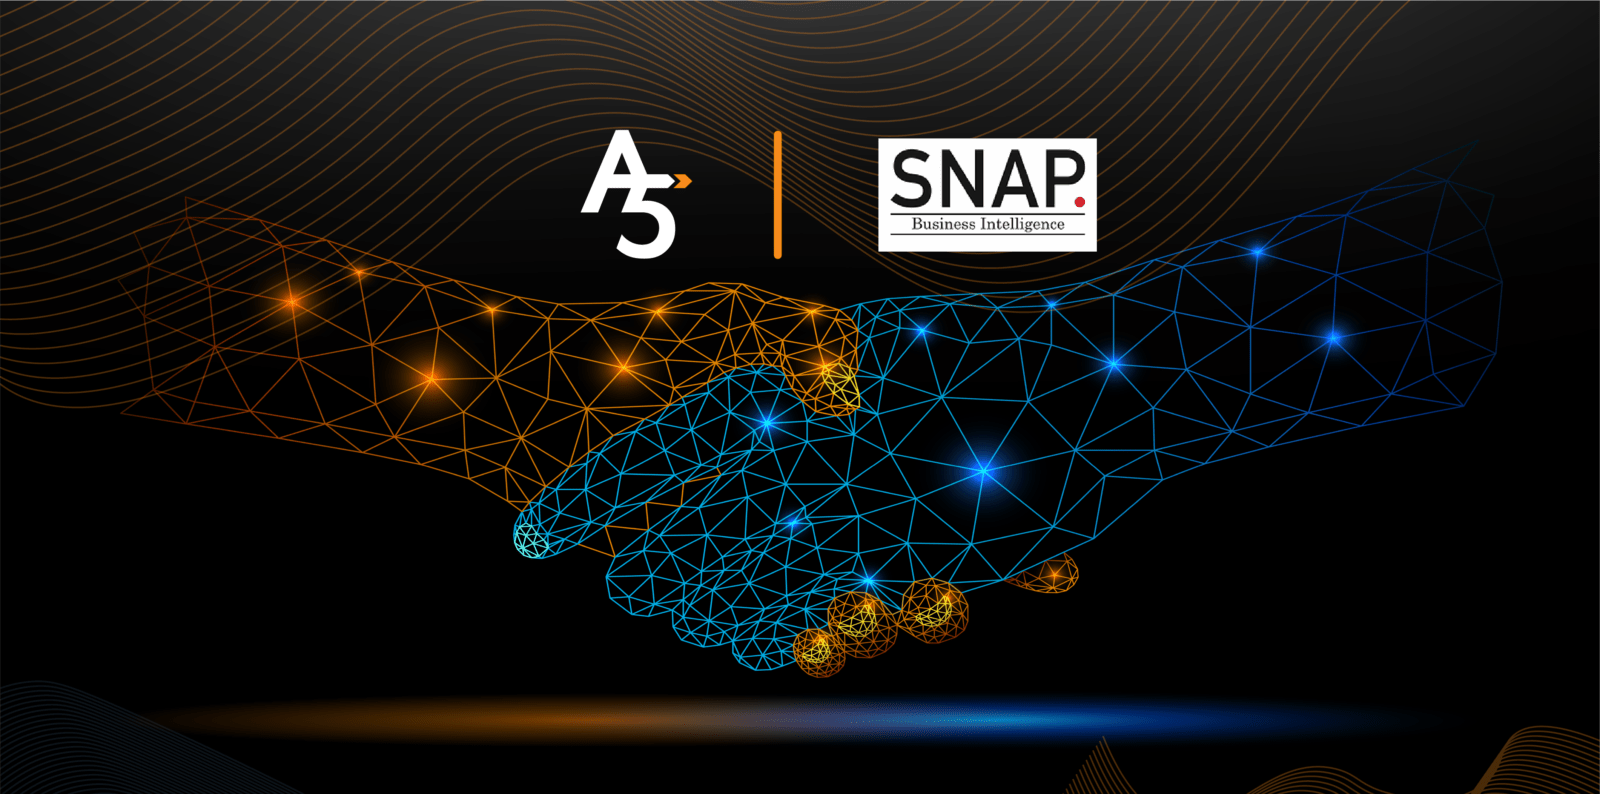 acquisition with SnapBI